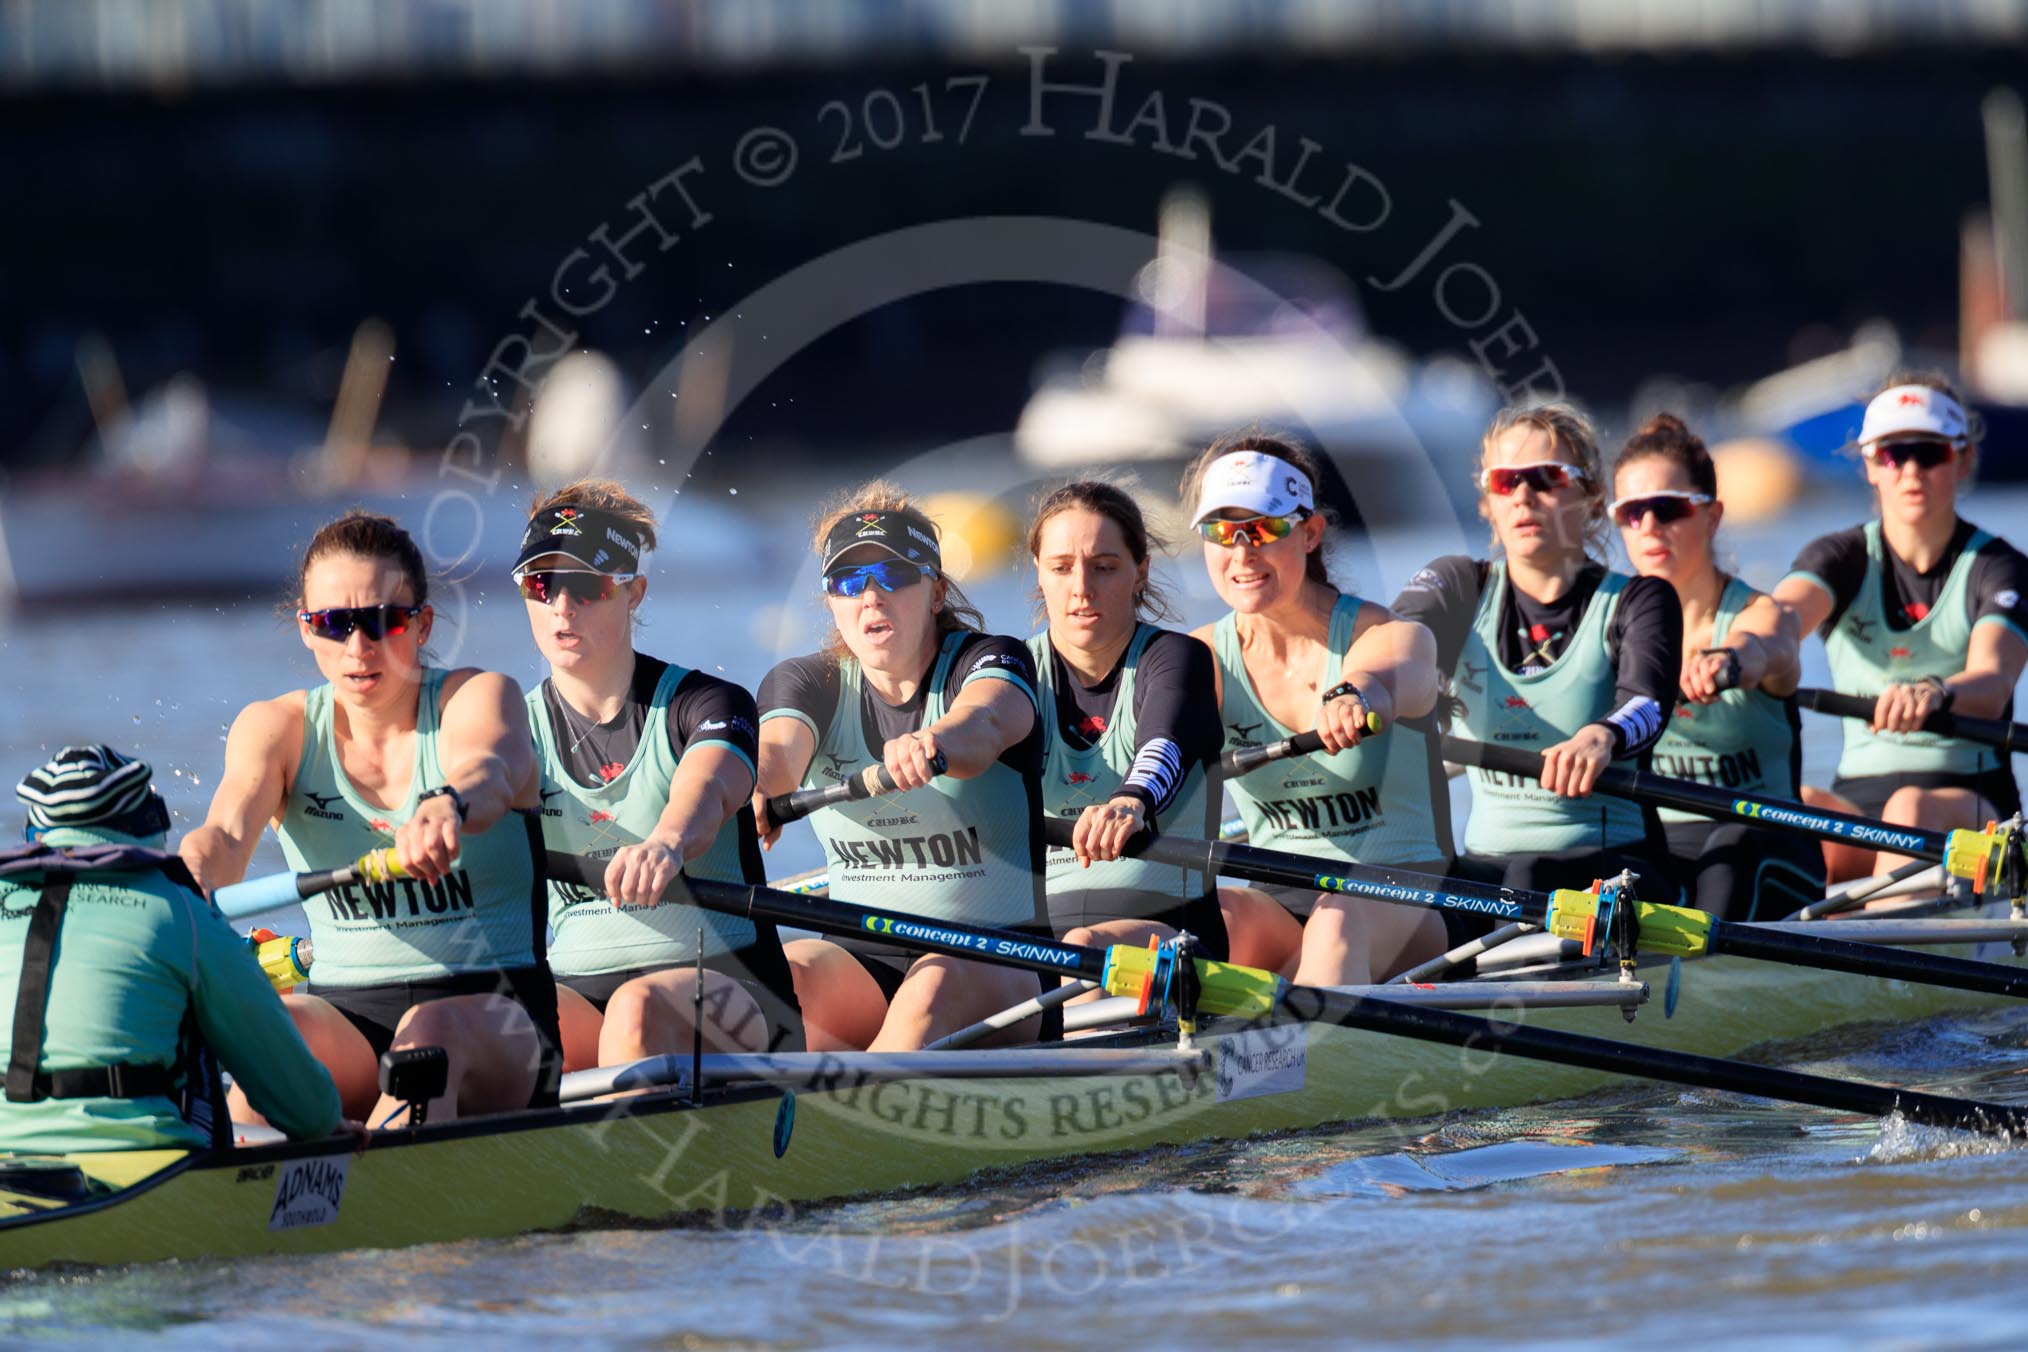 The Women's Boat Race season 2018 - fixture CUWBC vs. ULBC: CUWBC extending their lead near the Putney boat houses - cox Sophie Shapter, stroke Tricia Smith, 7 Imogen Grant, 6 Anne Beenken, 5 Thea Zabell, 4 Paula Wesselmann, 3 Alice White, 2 Myriam Goudet-Boukhatmi, bow Olivia Coffey.
River Thames between Putney Bridge and Mortlake,
London SW15,

United Kingdom,
on 17 February 2018 at 13:10, image #53